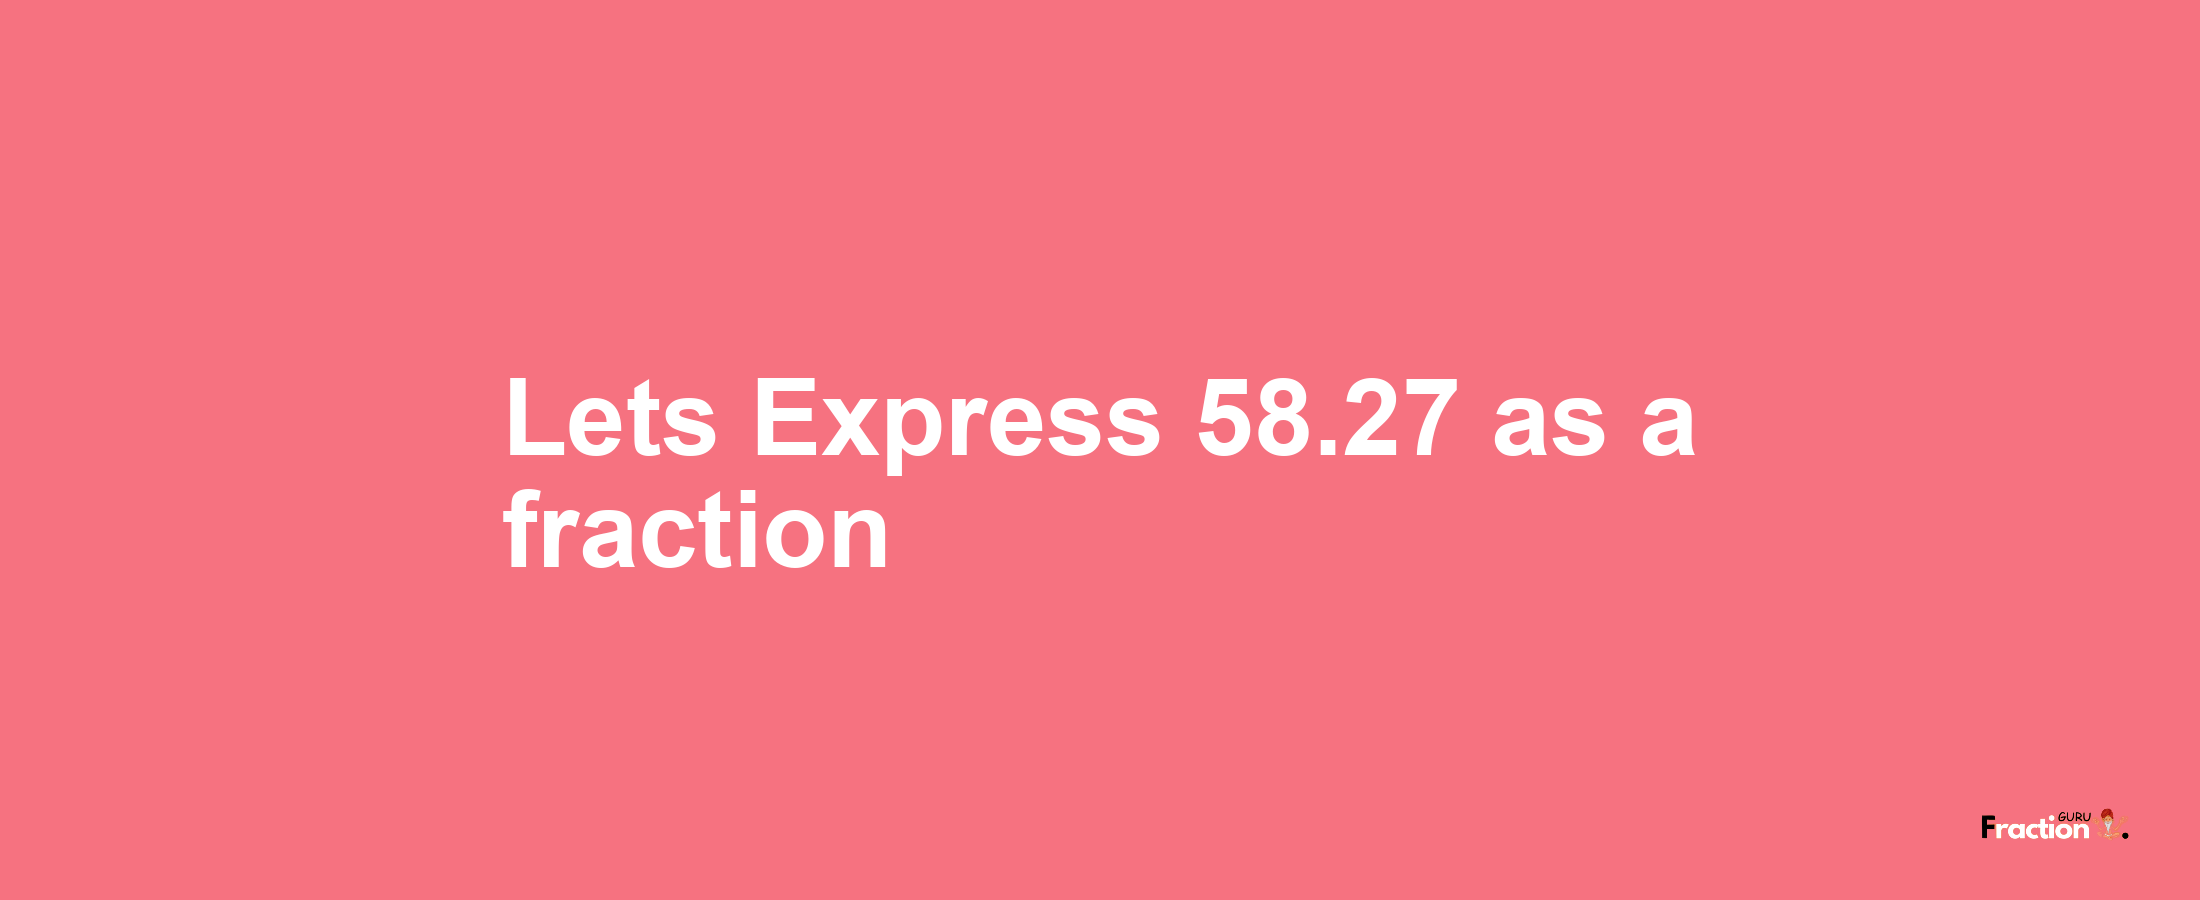 Lets Express 58.27 as afraction